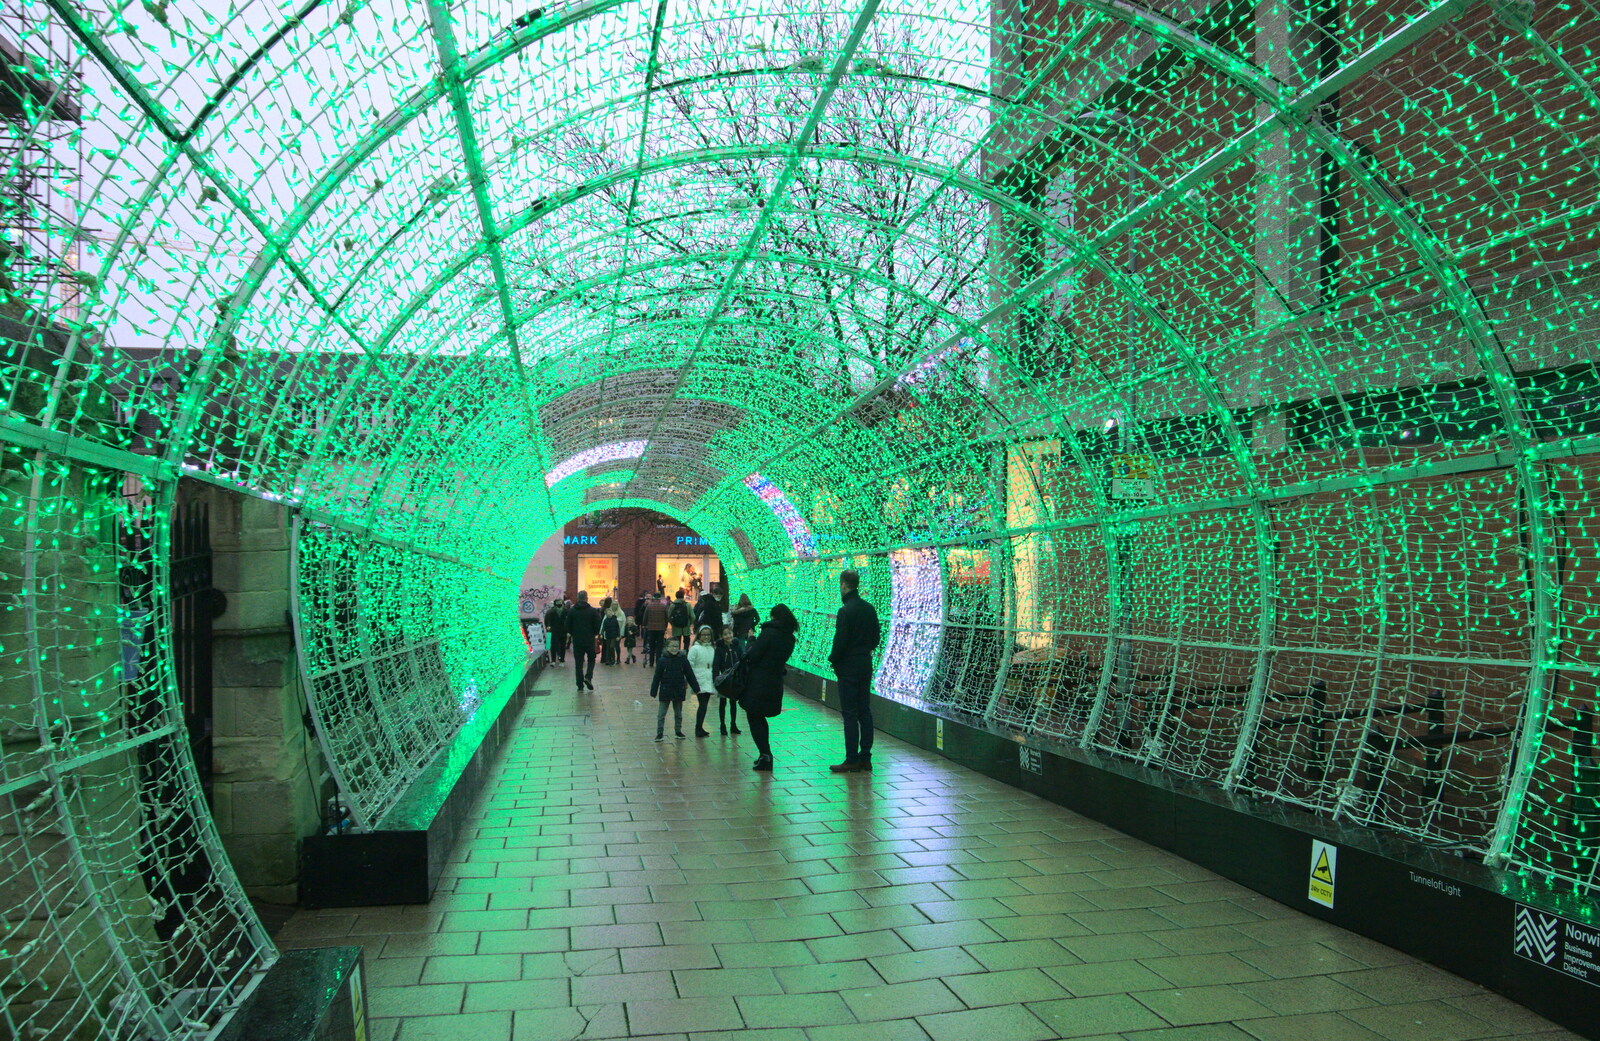 The Light Tunnel is all green from A Bit of Christmas Shopping, Norwich, Norfolk - 23rd December 2020